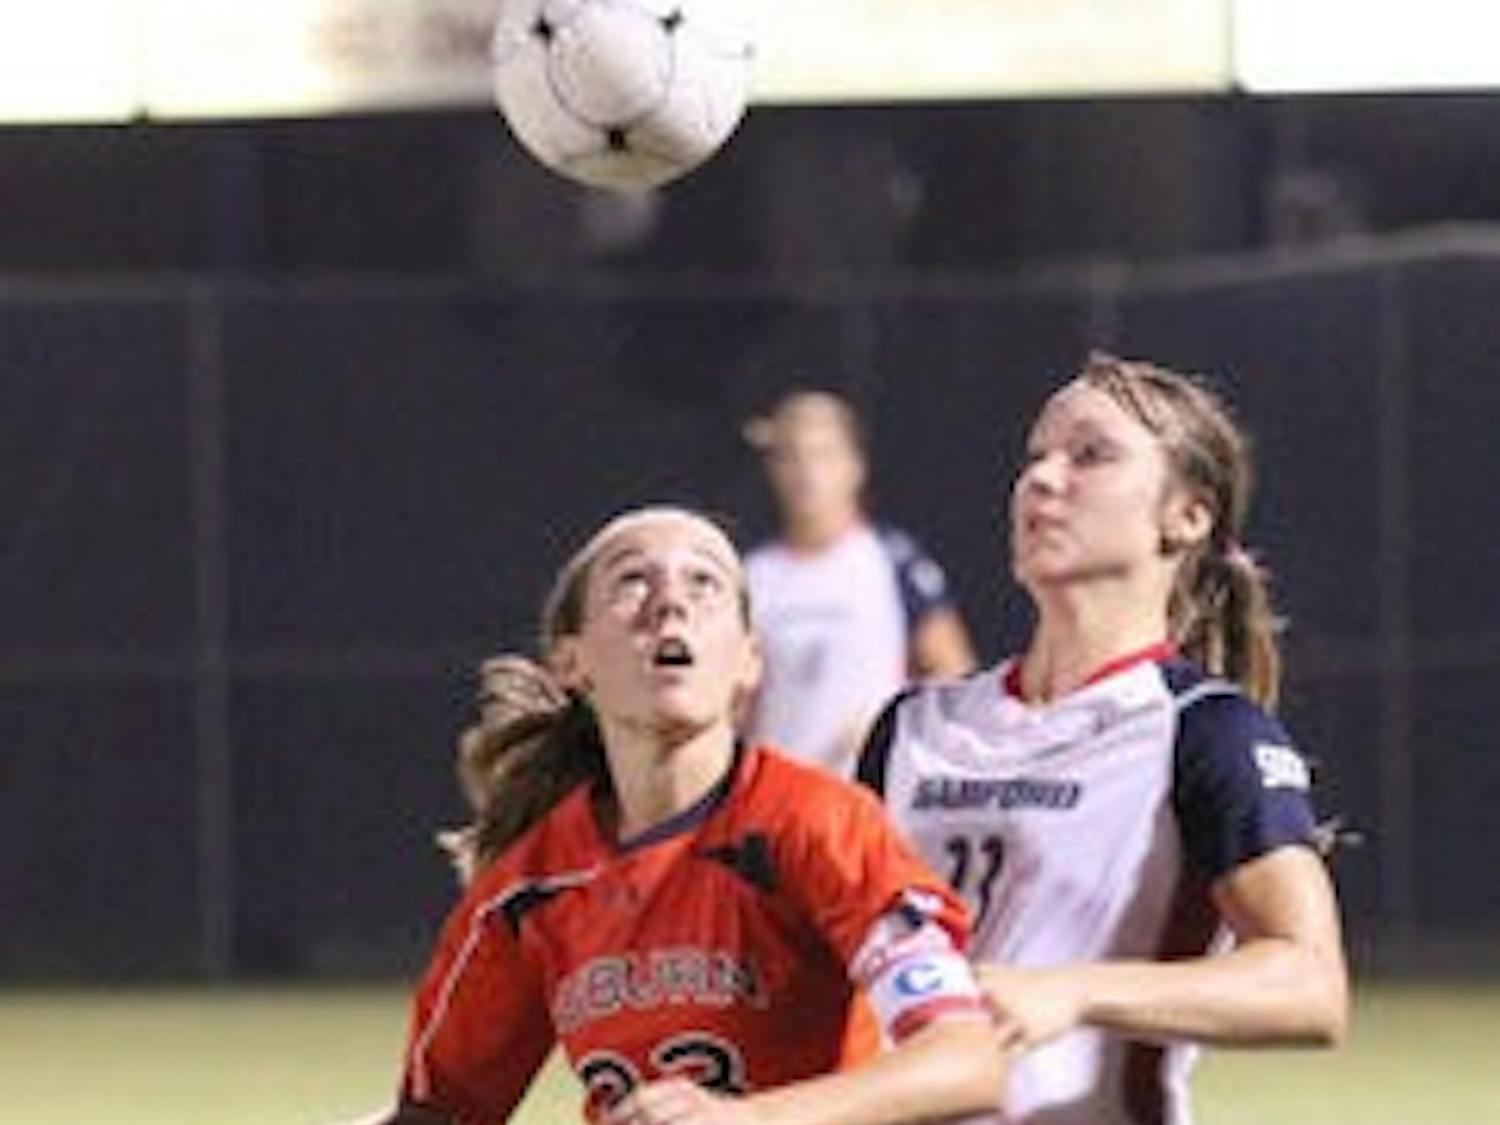 Junior midfielder Katy Frierson beats a Samford opponent to the ball. Frierson had two shots and two assists in the game. (Emily Adams / PHOTO EDITOR)